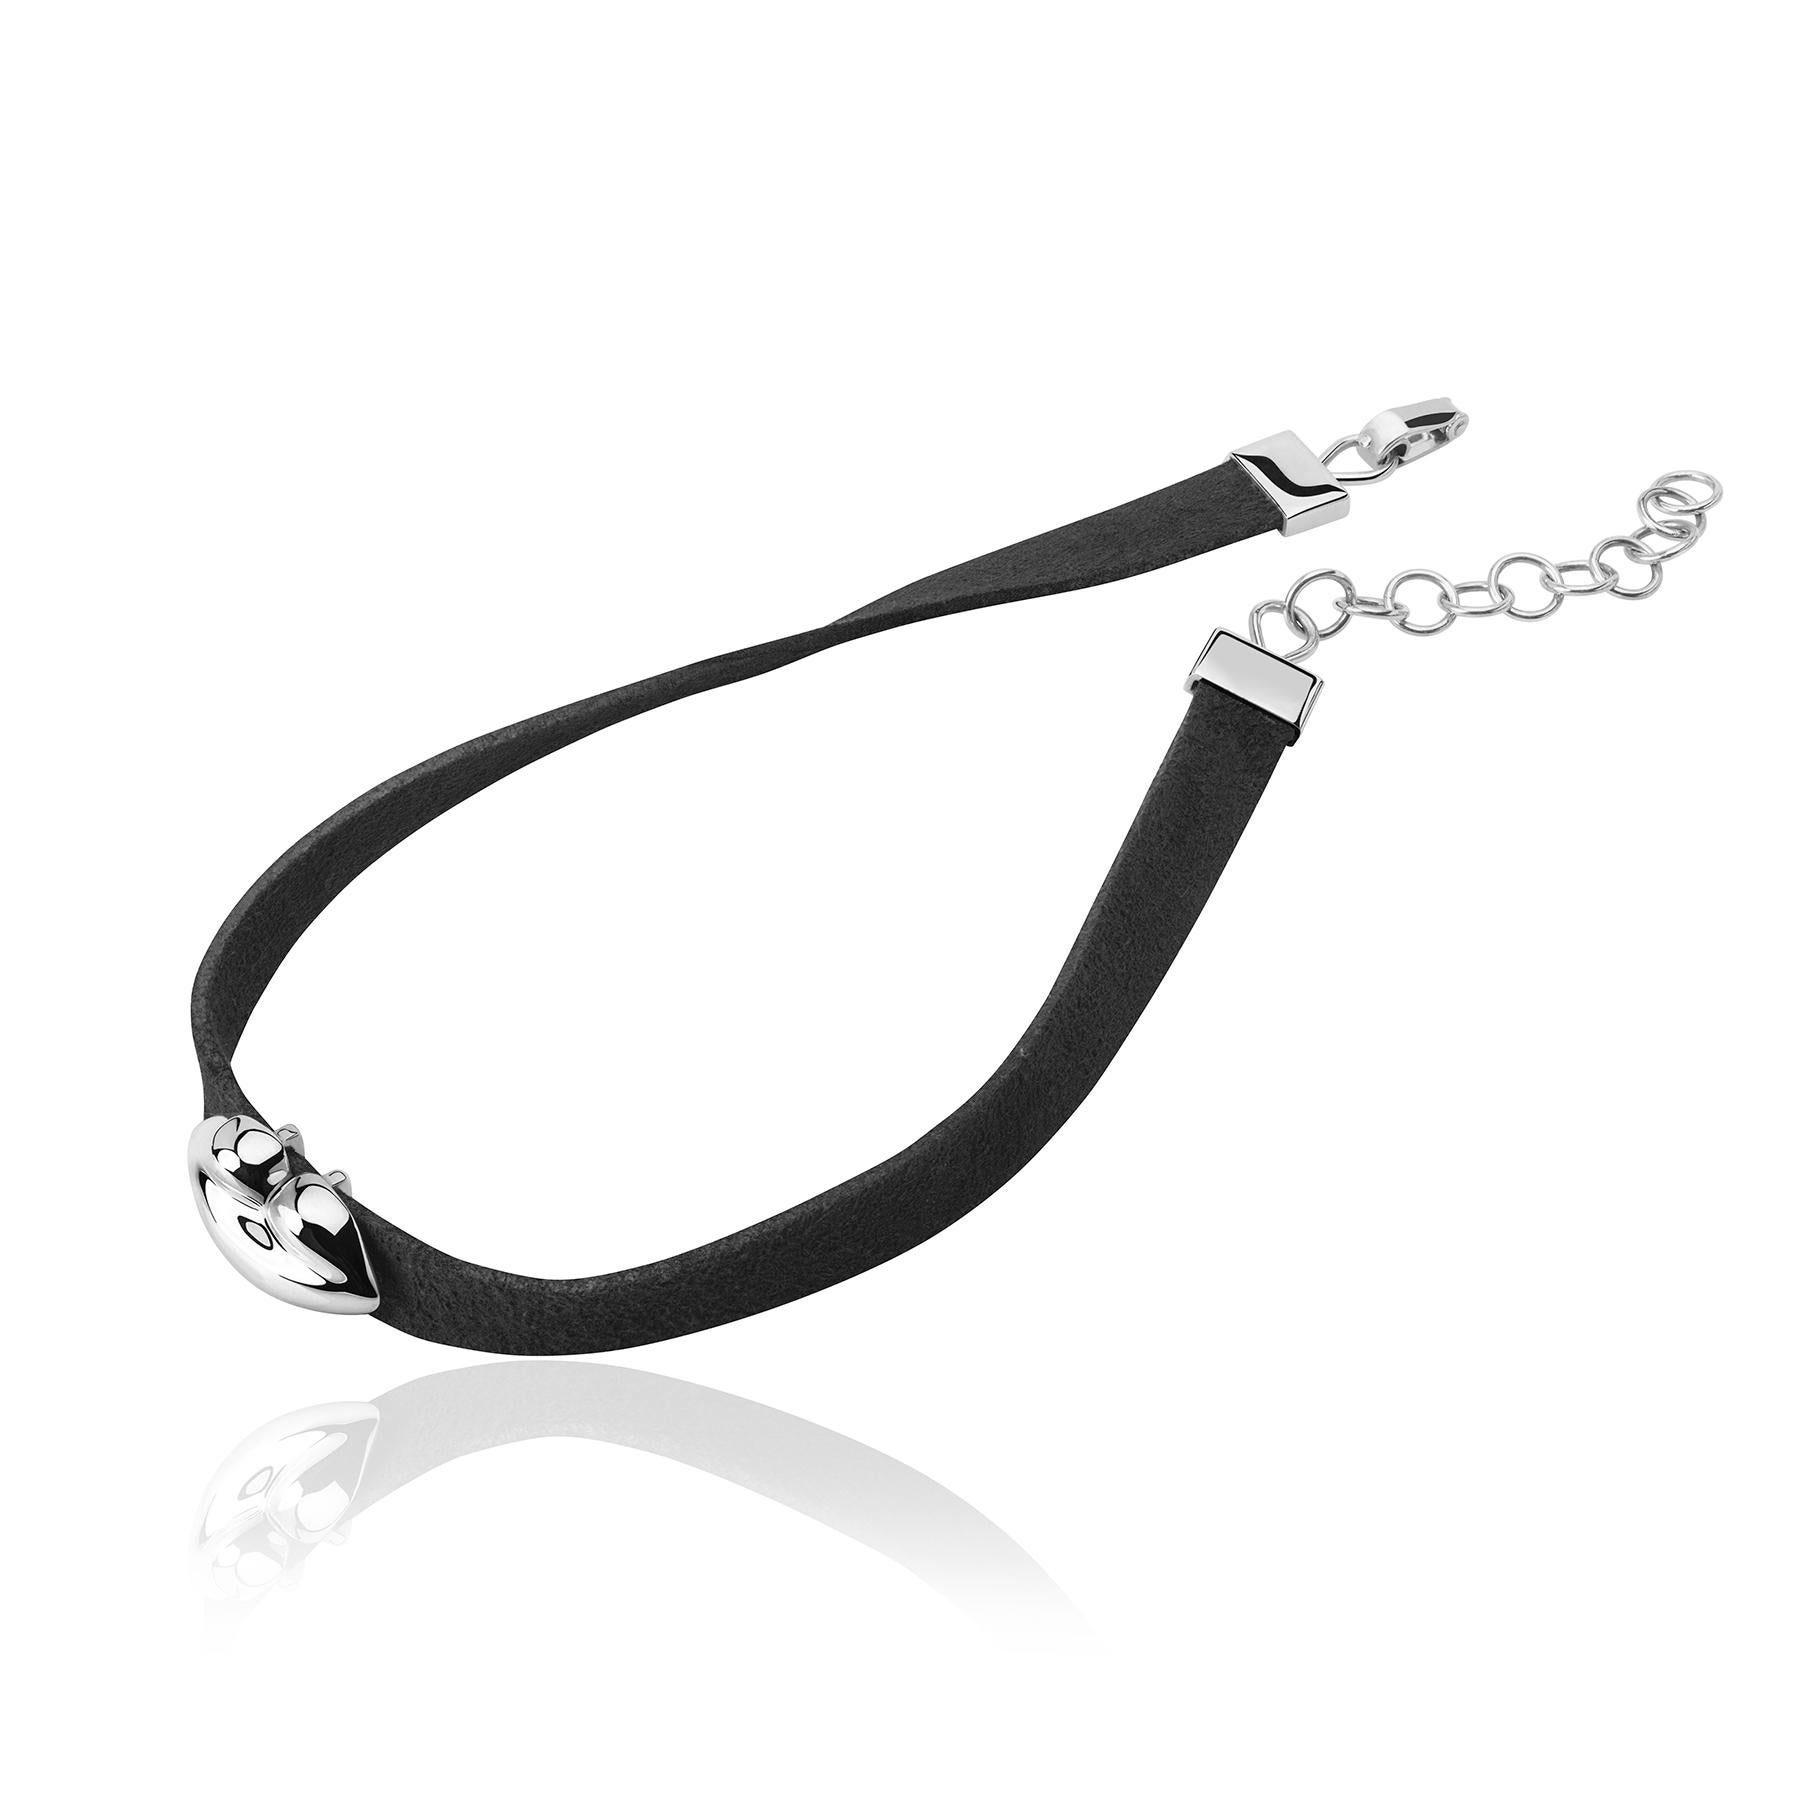 The Bésame Solitaire Choker from the Bésame collection by TANE is made in sterling silver with a black suede ribbon. A close-fitting piece in natural suede with a slip-on kiss motif, gently sculpted in TANE's vision. The kiss can be placed anywhere